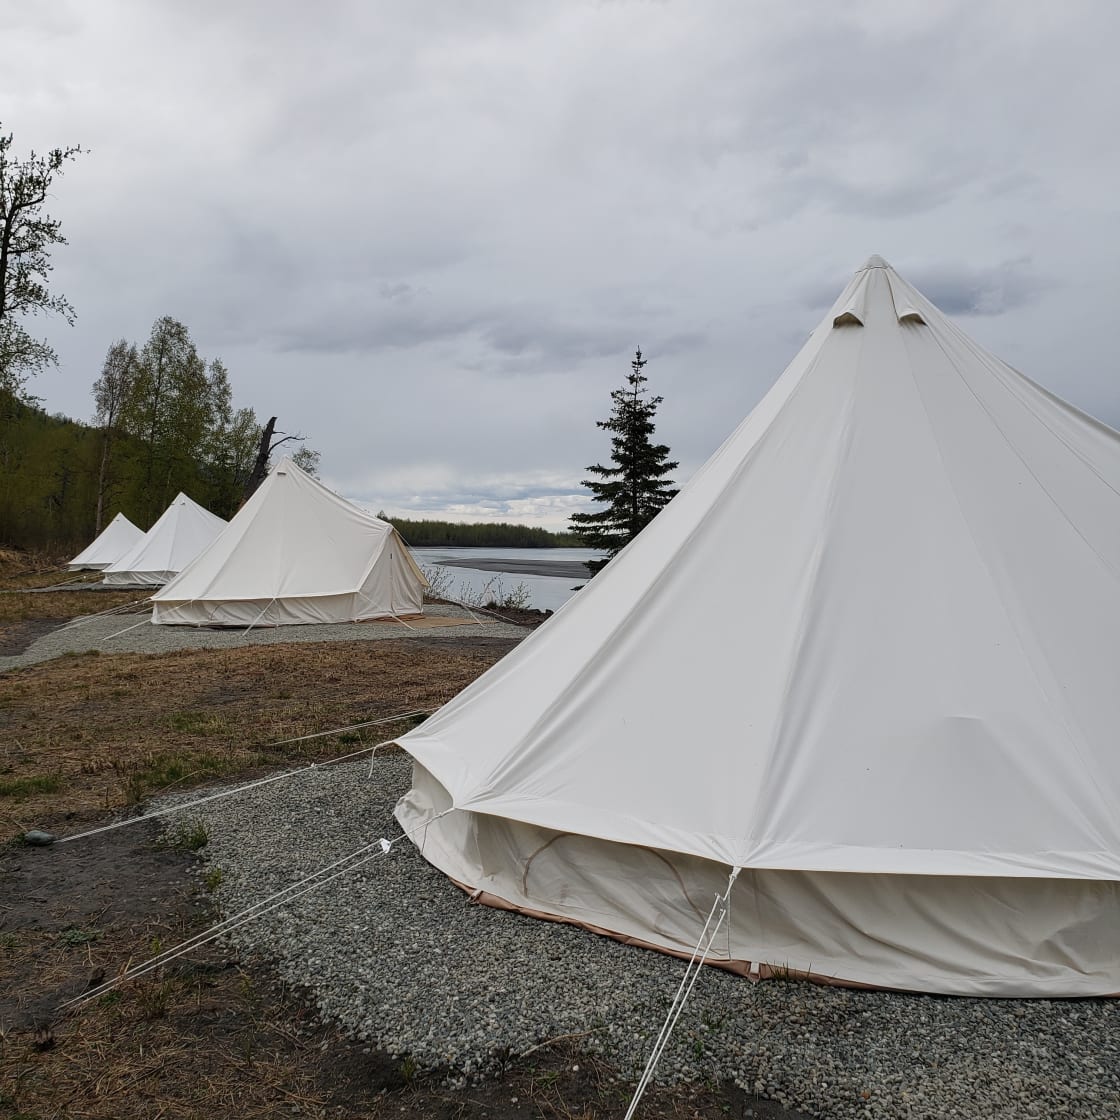 Four of our tents are set up along the Knik River